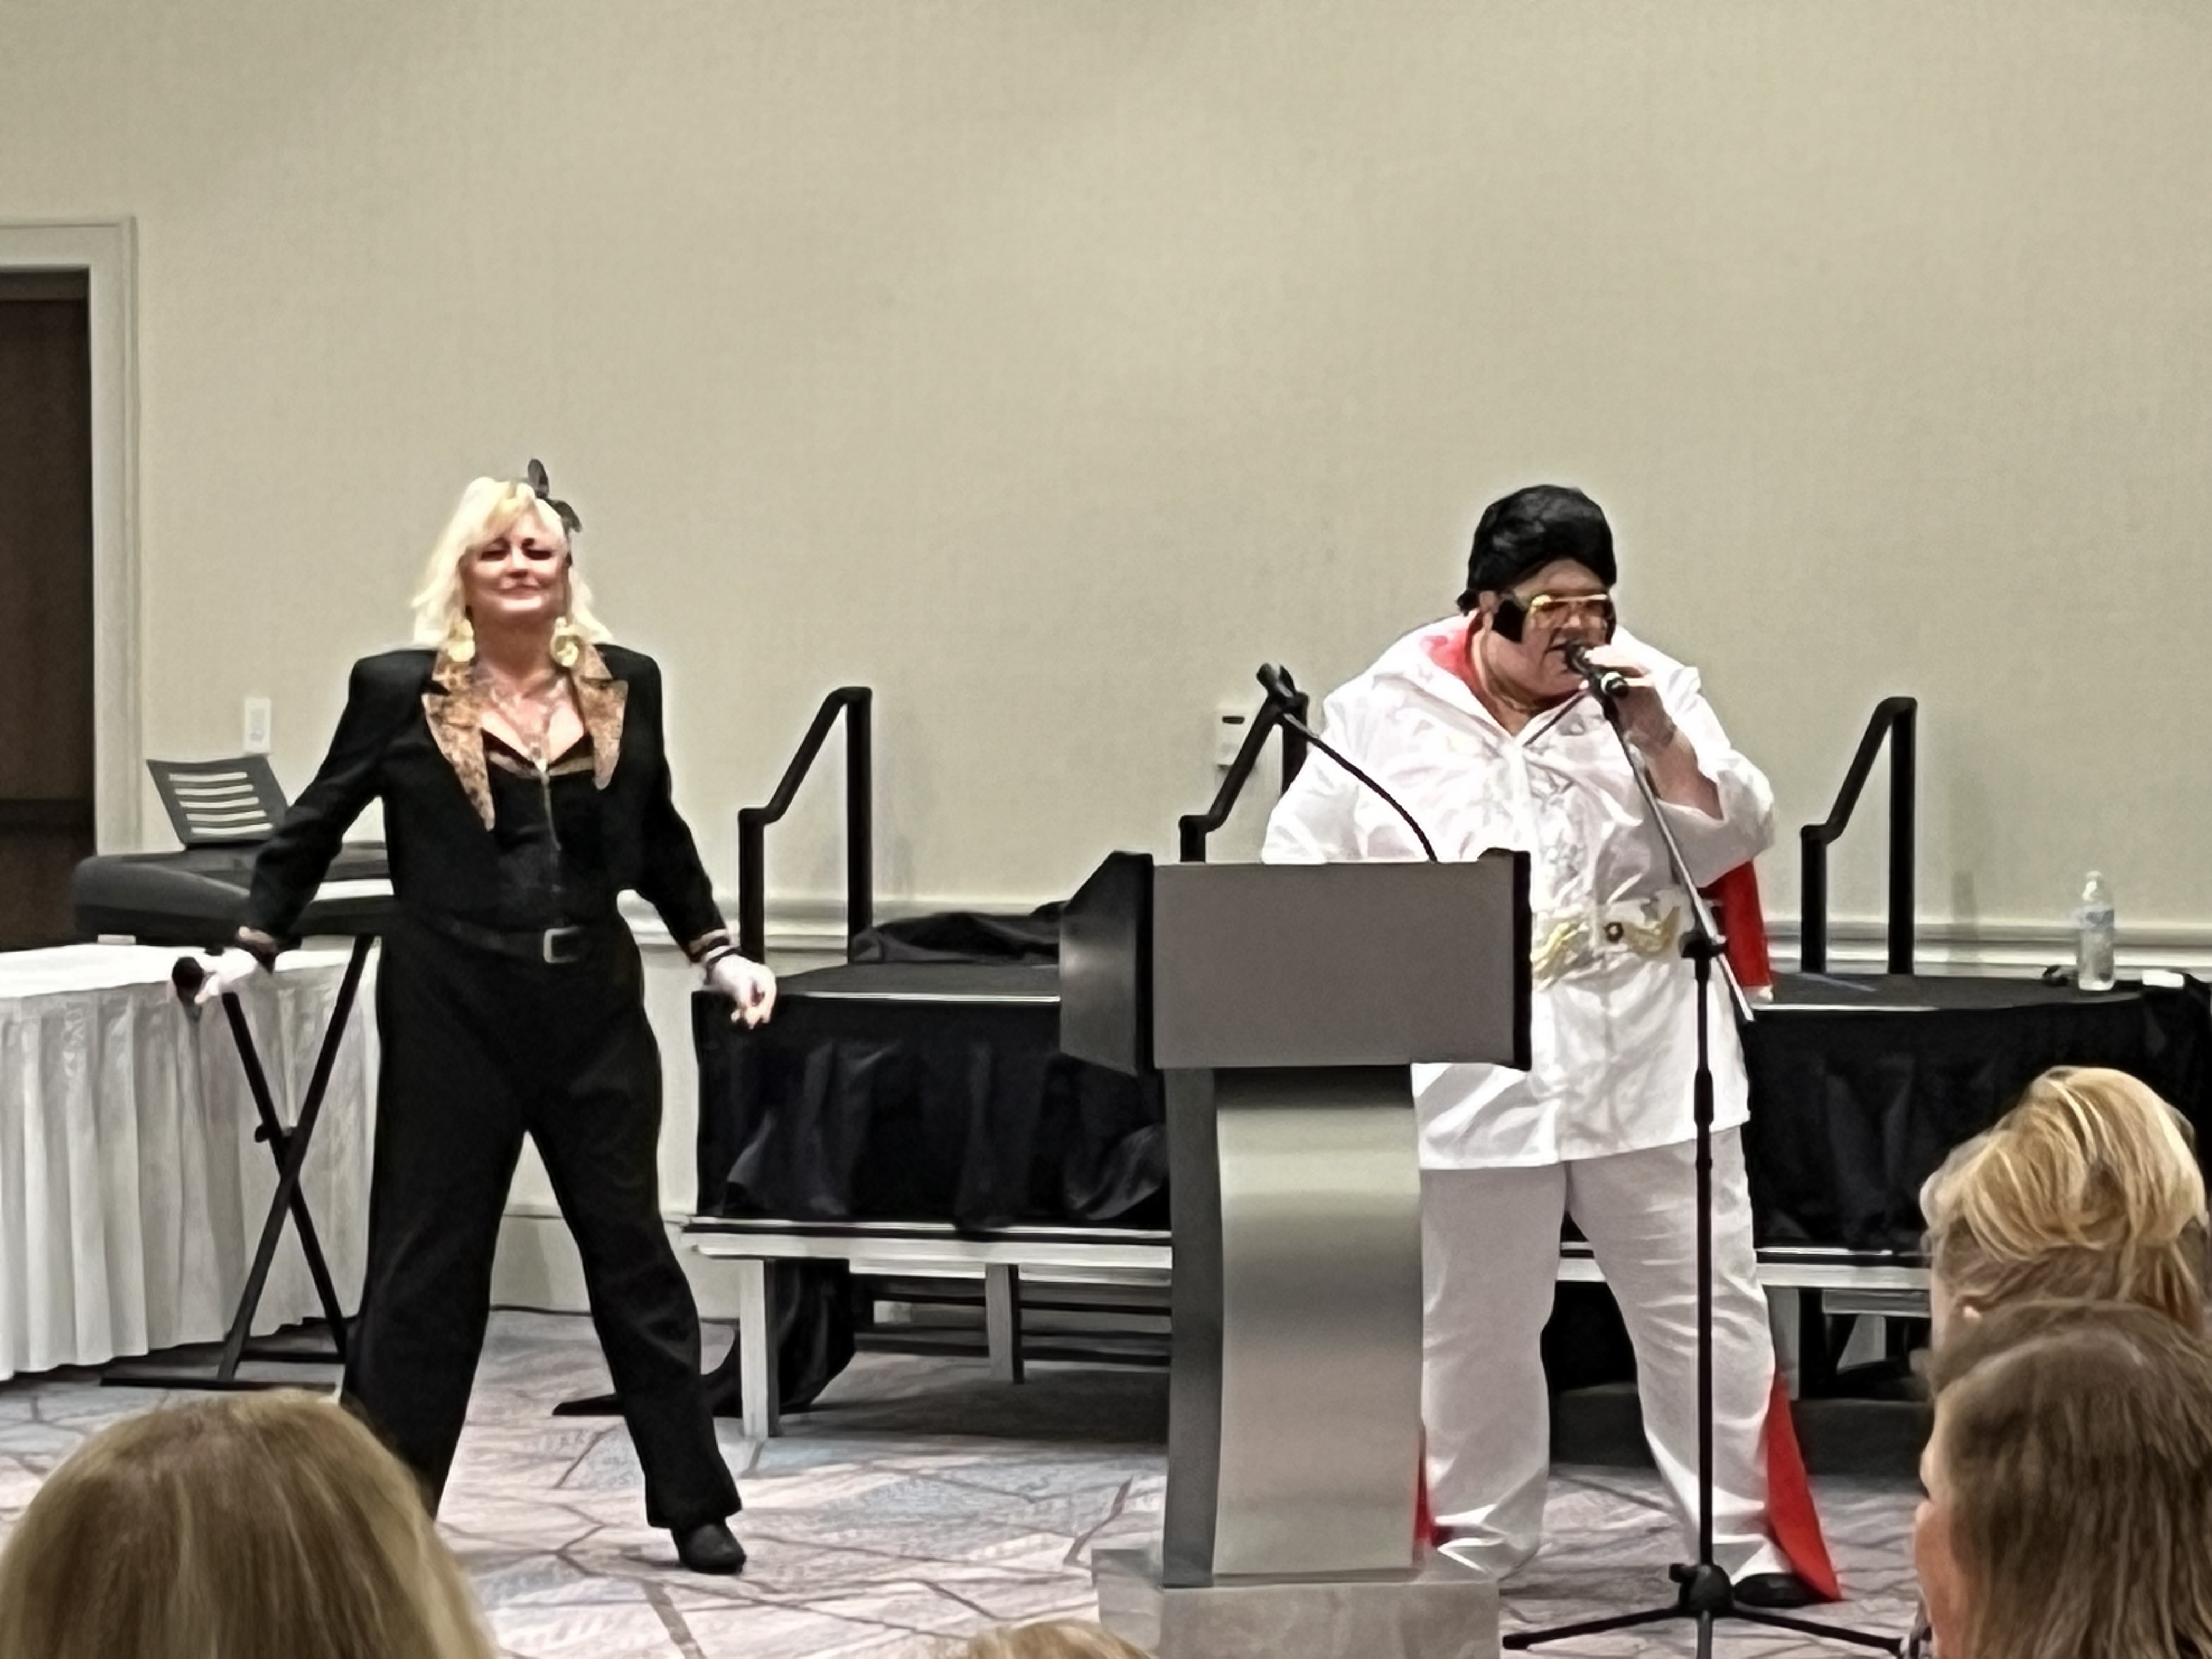 A surprise visit from Elvis and Madonna!